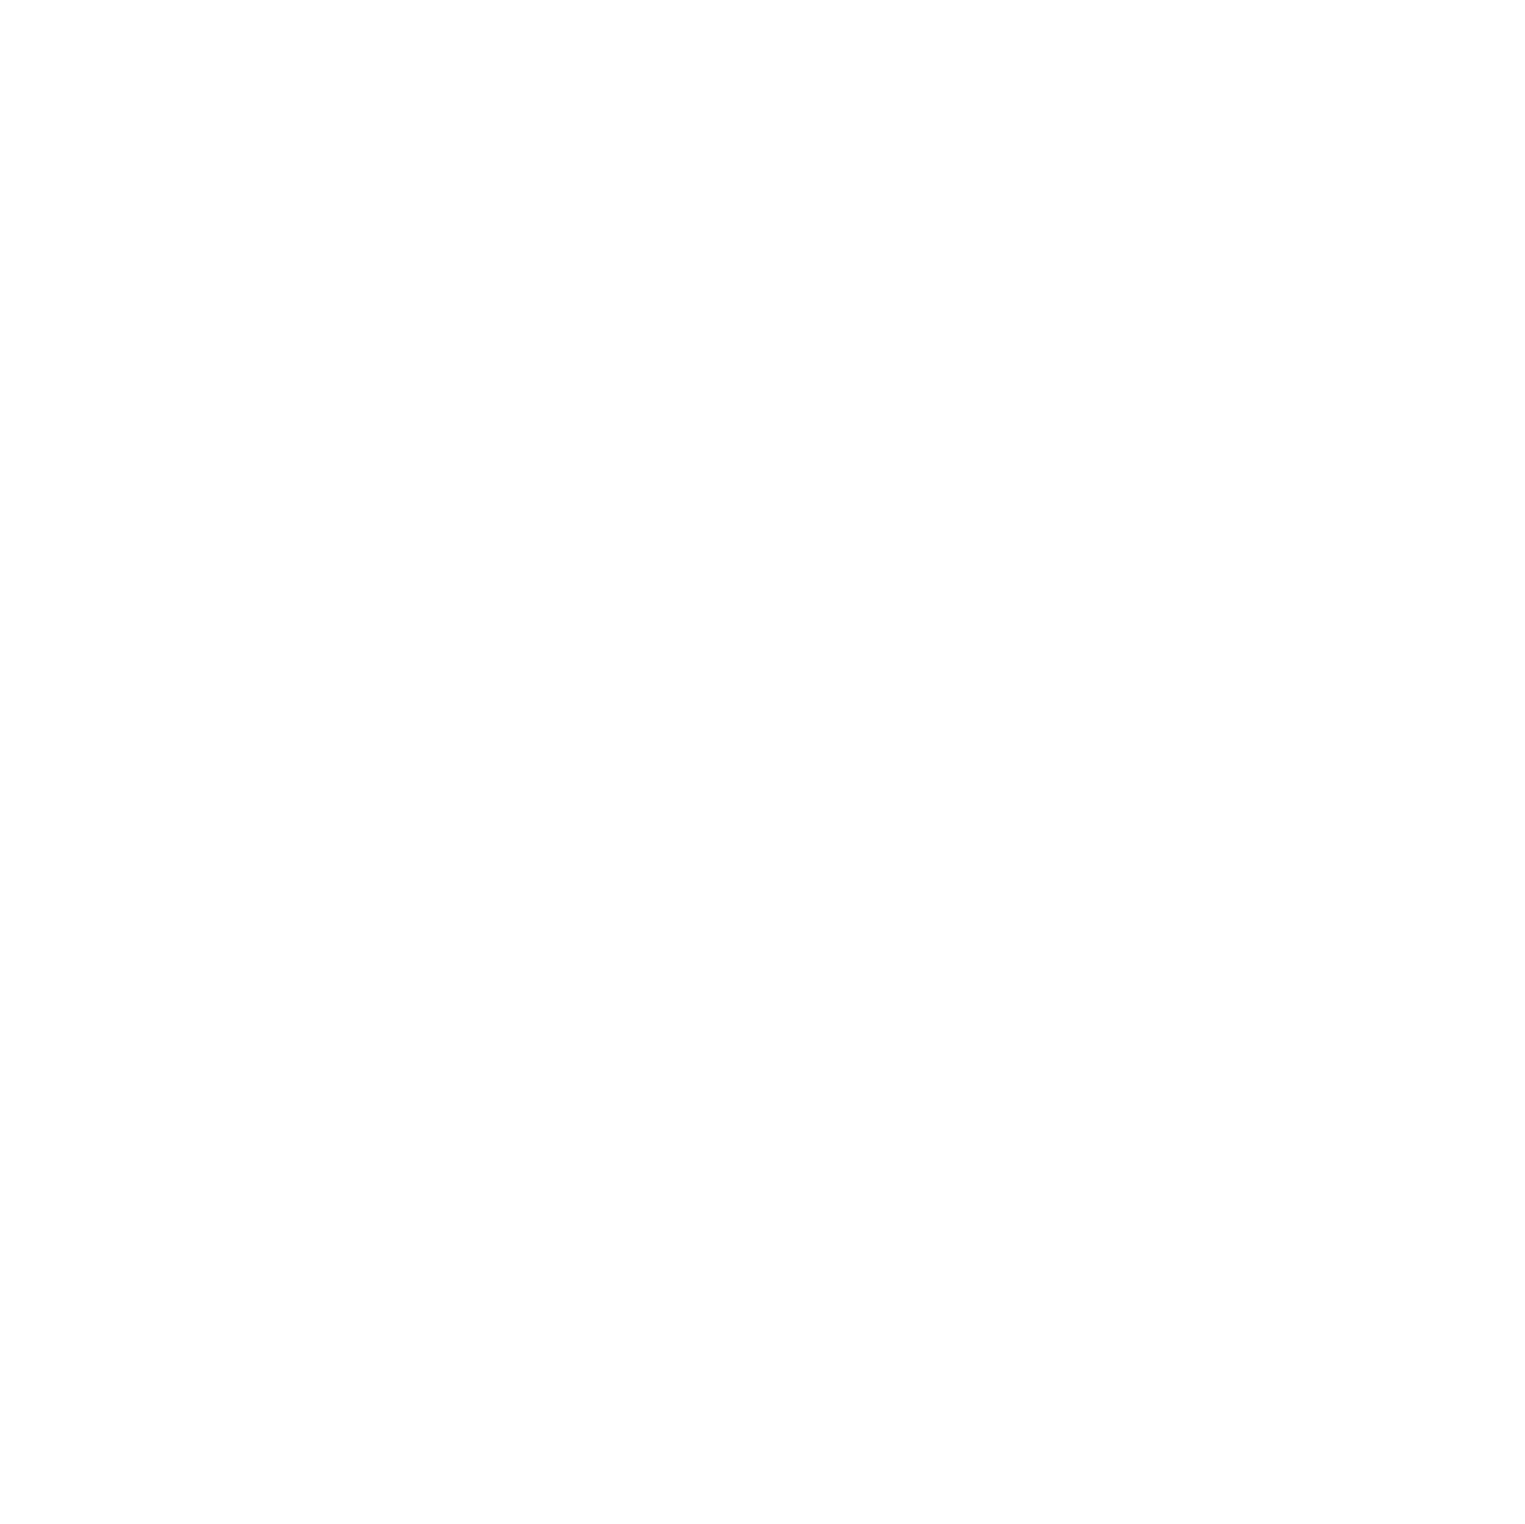 Roblox logo for dark backgrounds (transparent PNG)